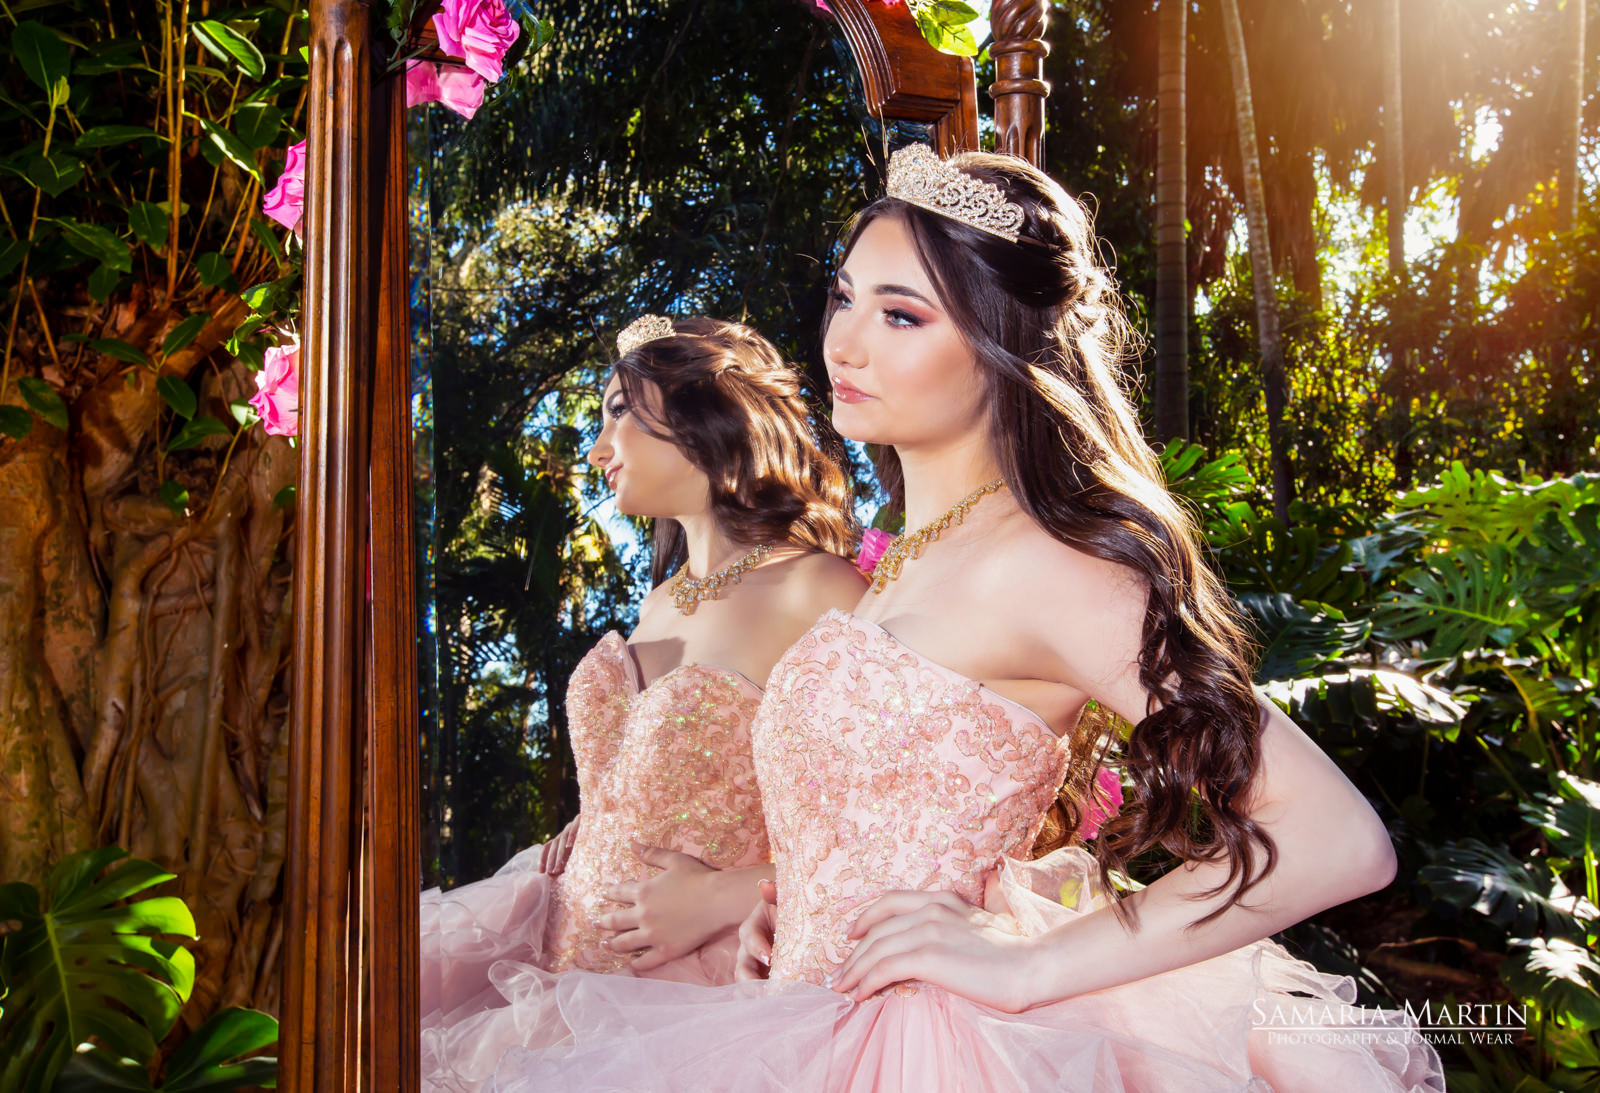 Sweet 15 Photography Packages, Quinceanera Pictures, Quinceanera photo Studio, Sweet 15 Pictures, Quinceanera Beach Pictures, Underwater Quinceañera Pictures, Professional Quinceañera Photography,